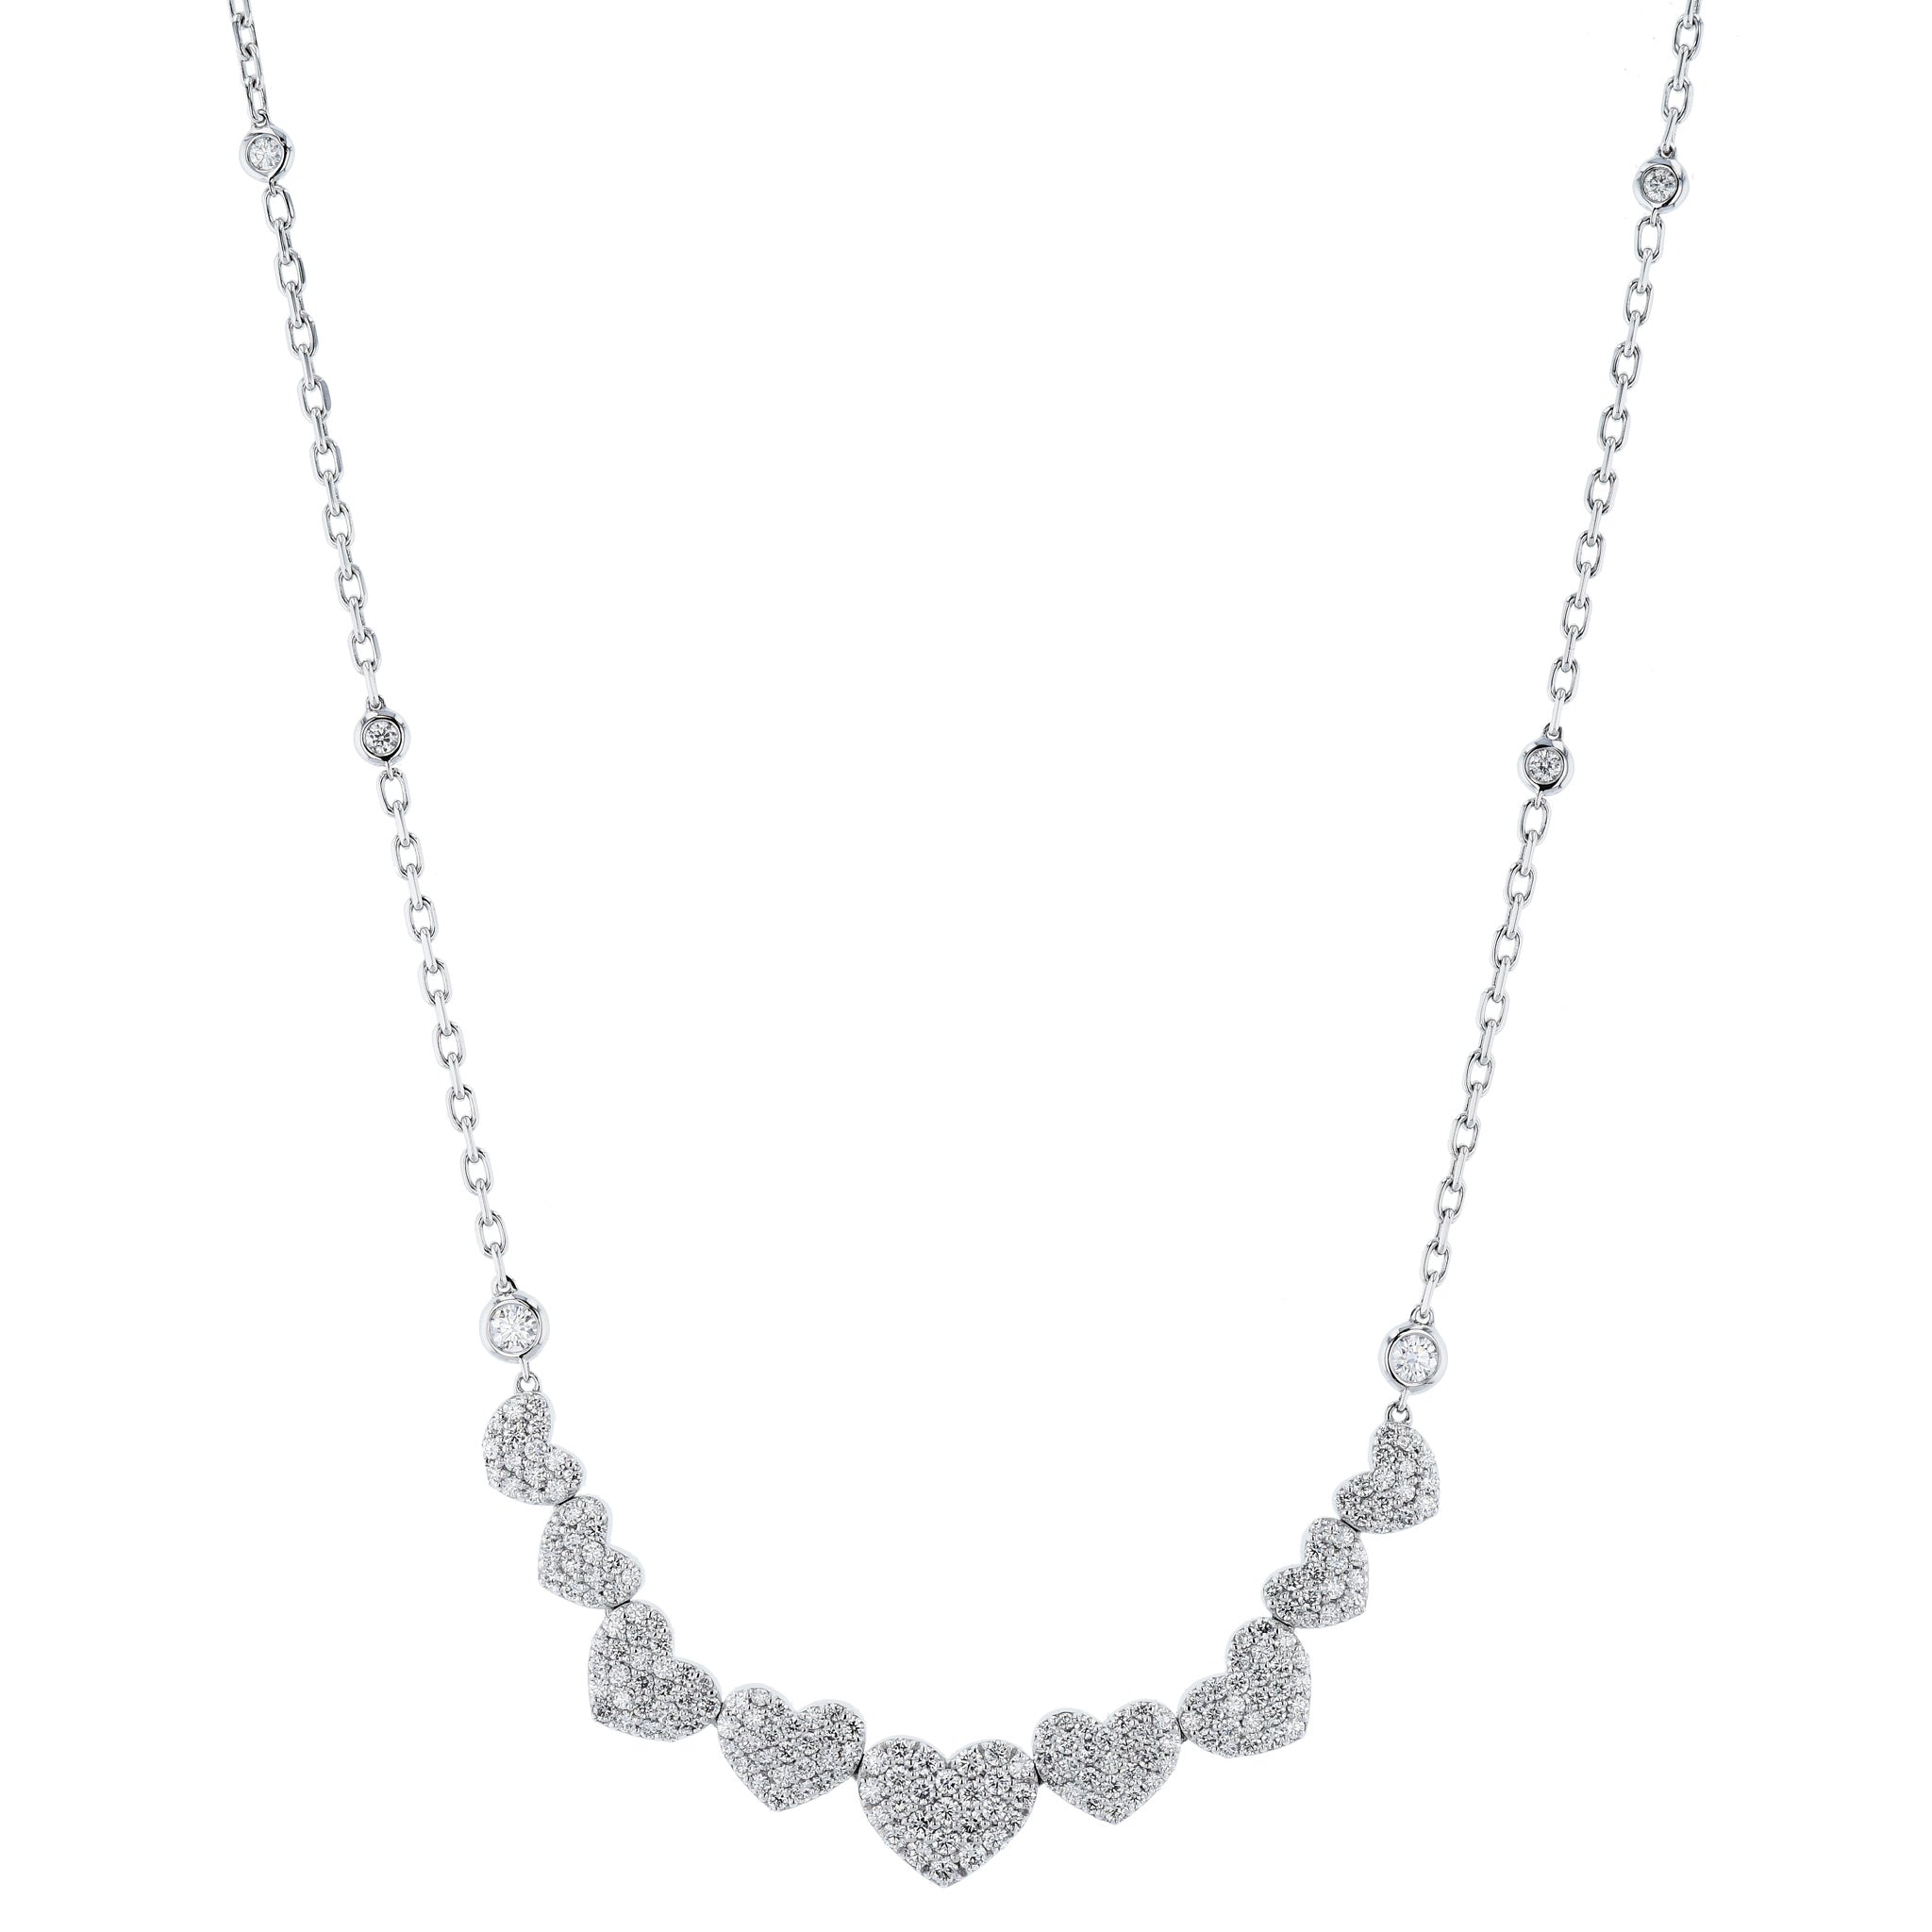 ‘Queen of 9 Hearts’ White Gold Diamond Necklace Necklaces Curated by H